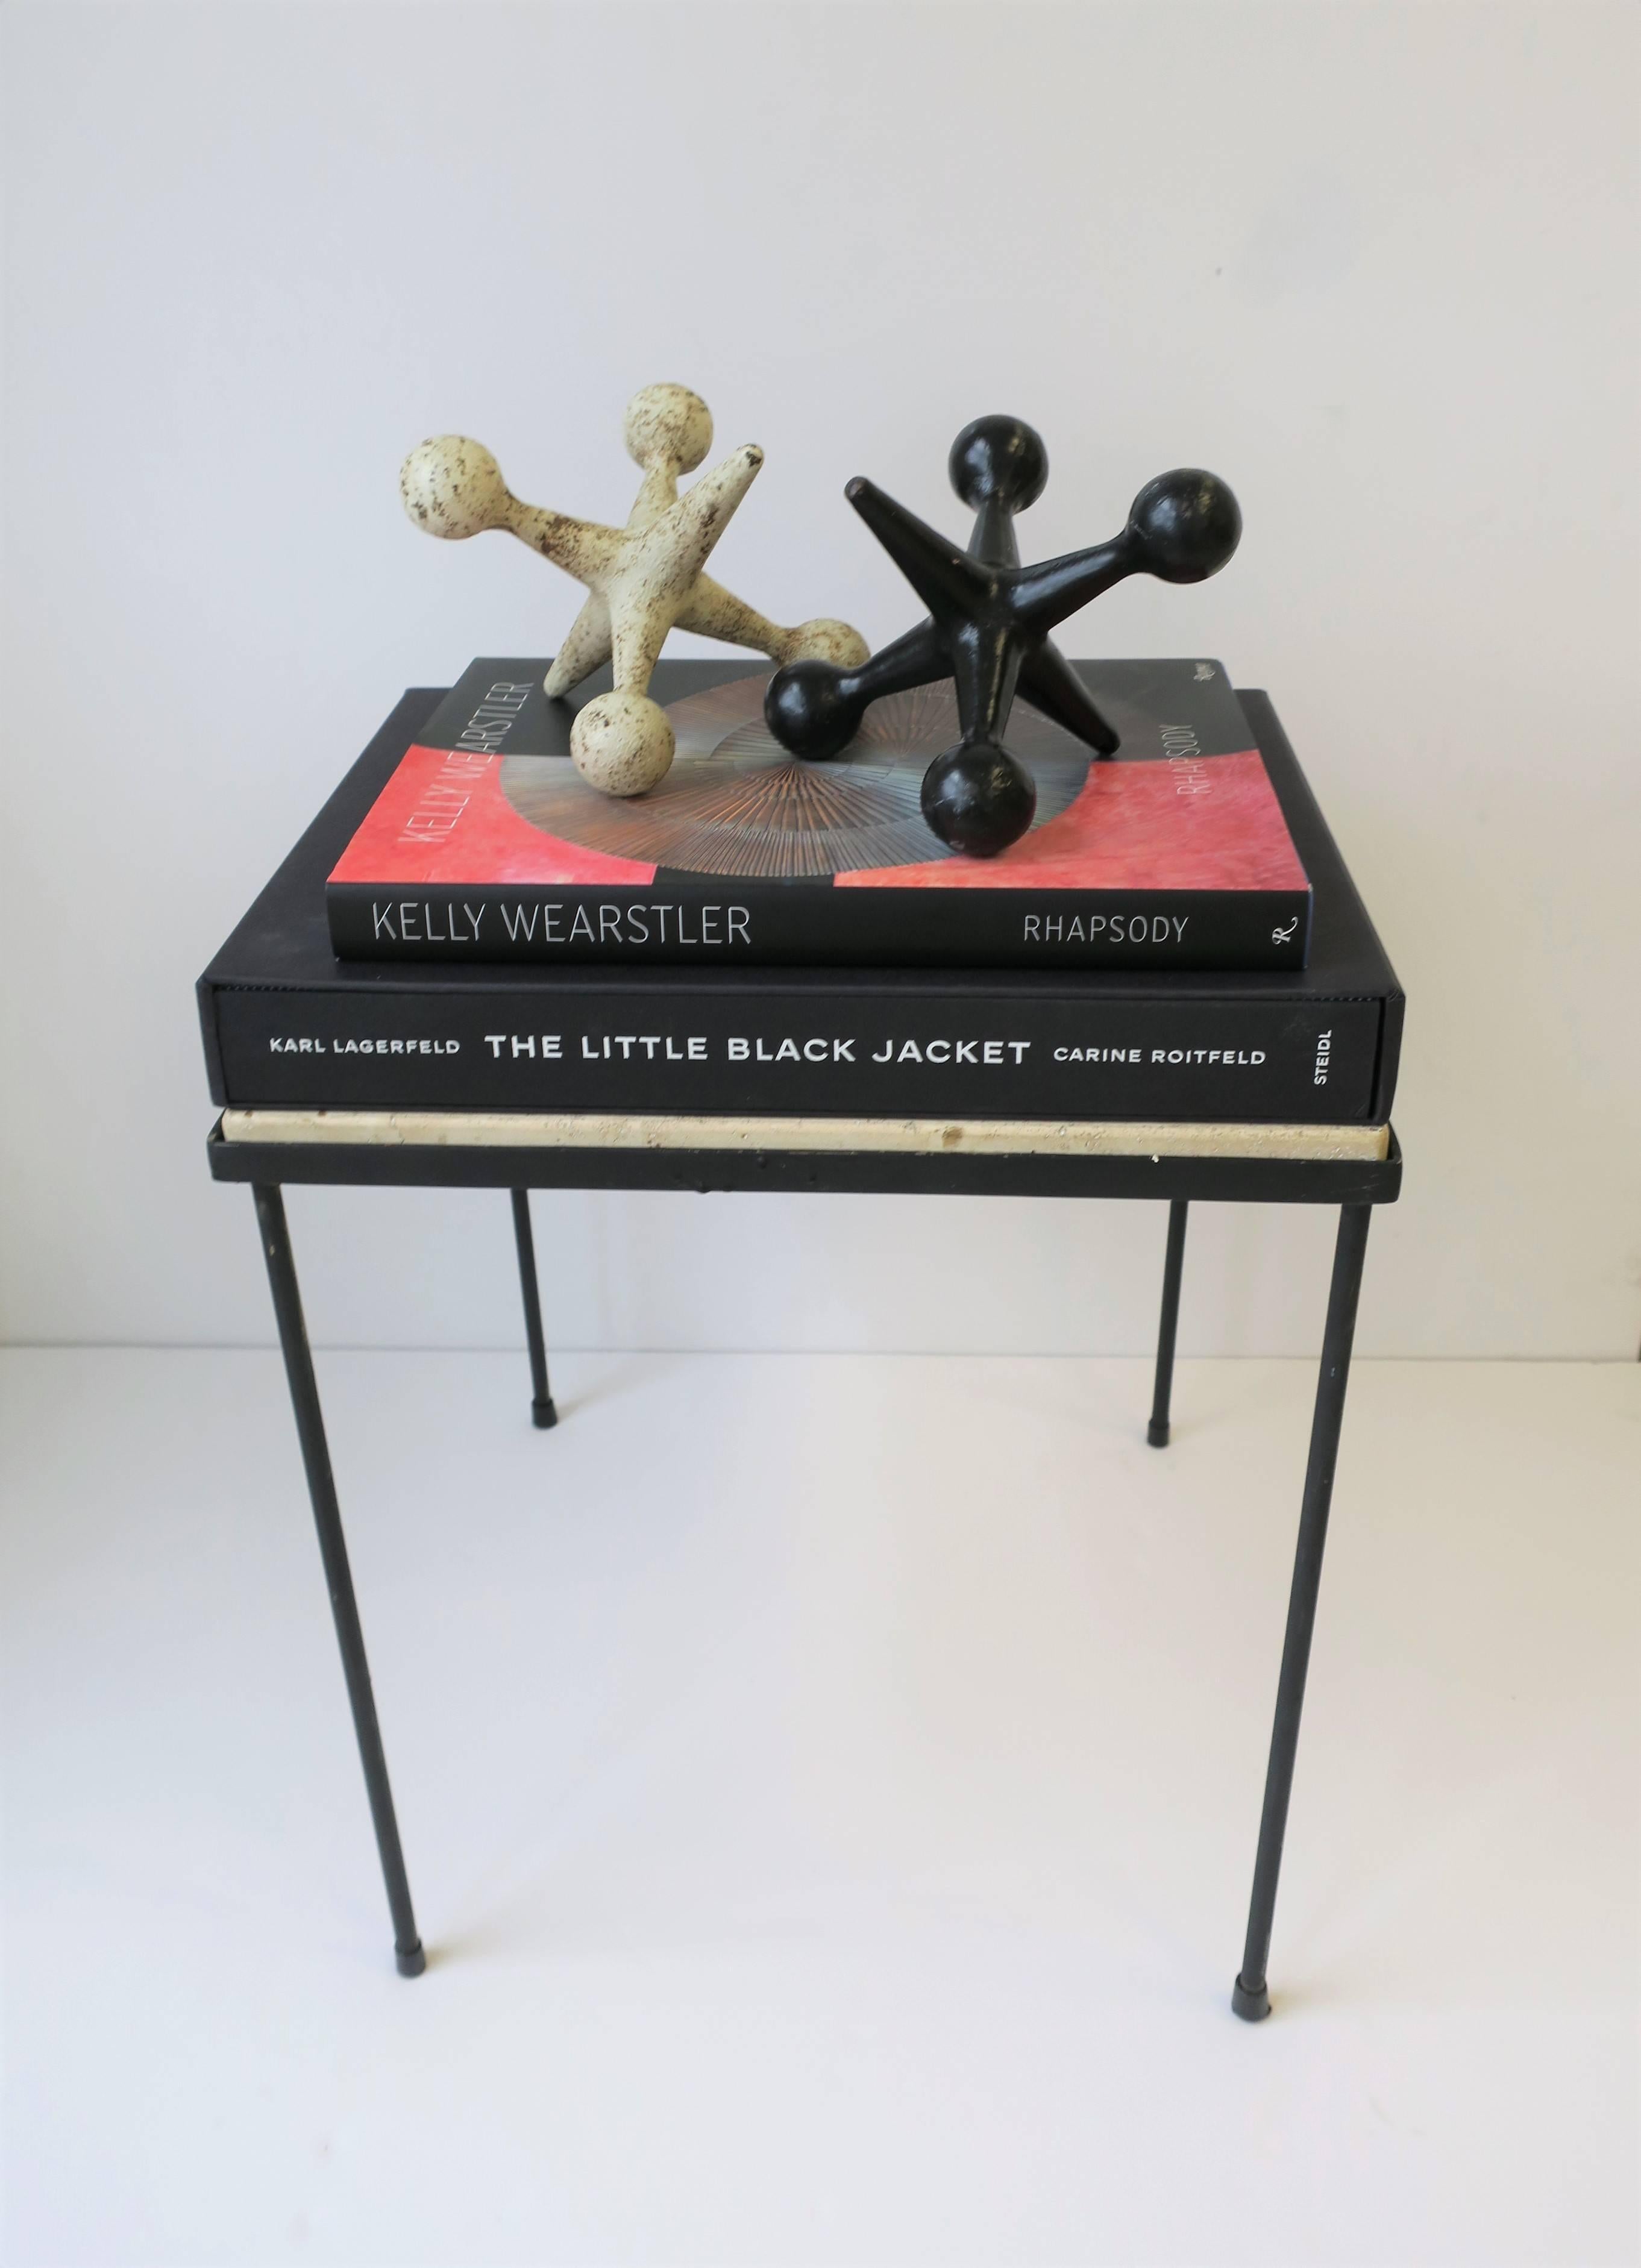 20th Century Black and White Iron Metal Jacks Bookends or Decorative Objects